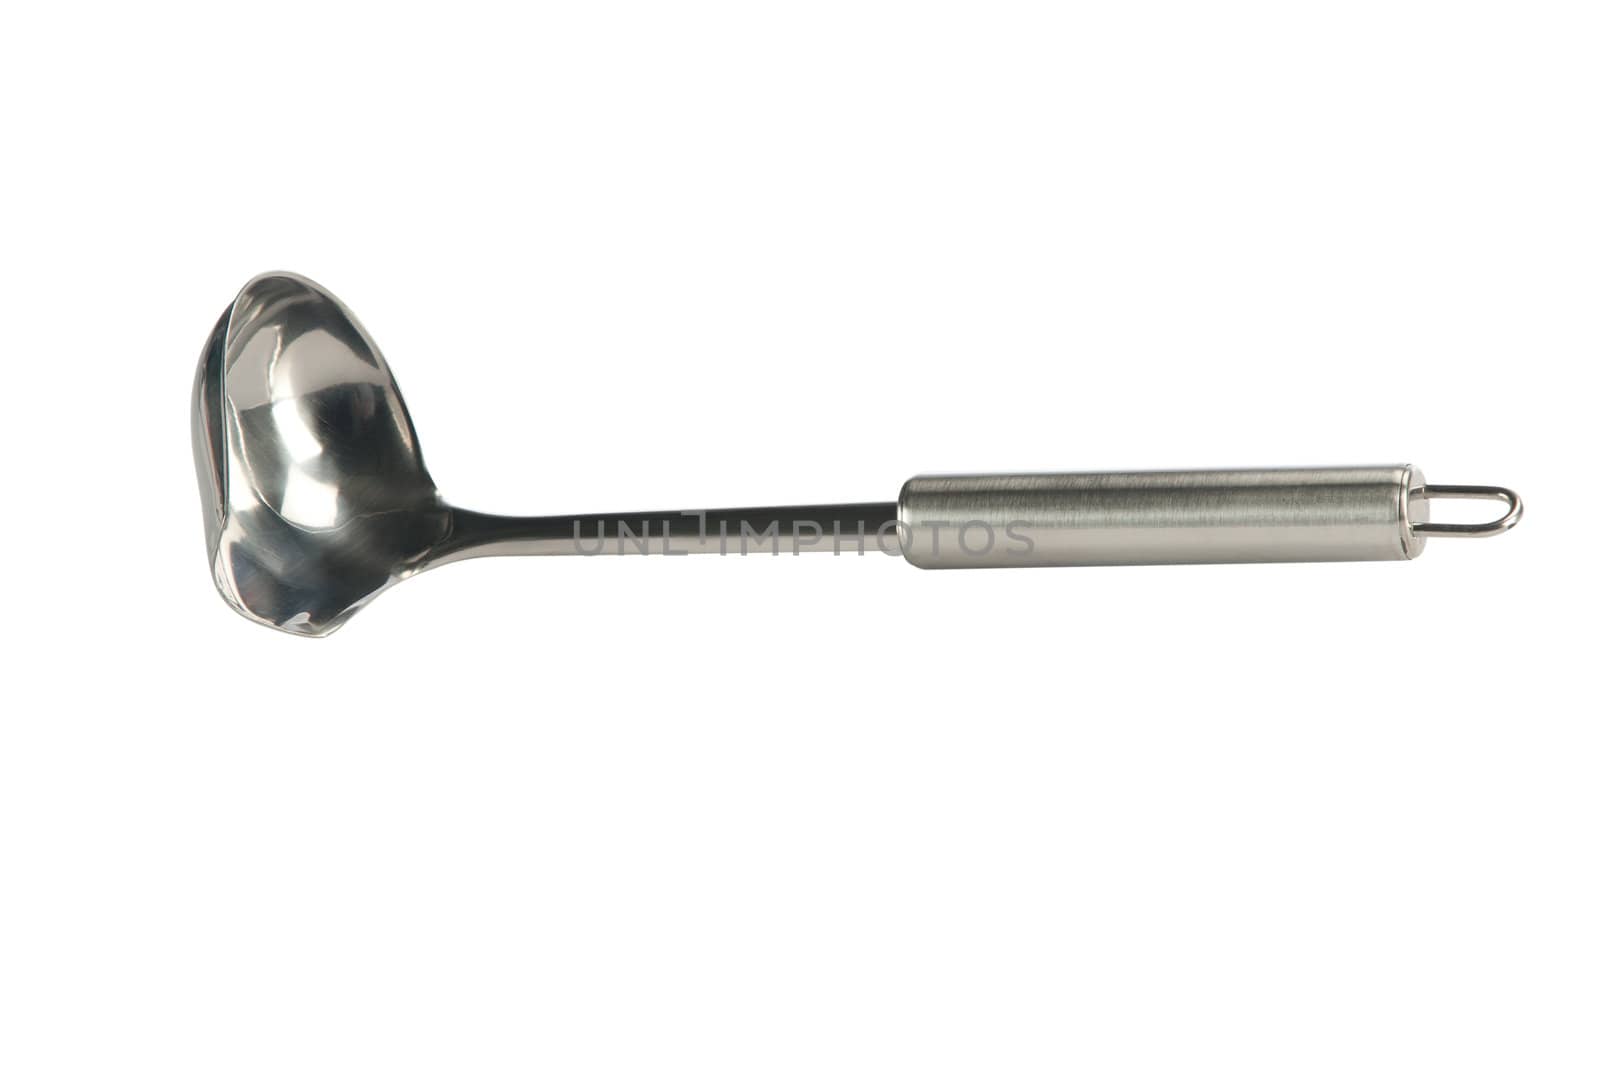 The big soup ladle from stainless steel isolated on a white background